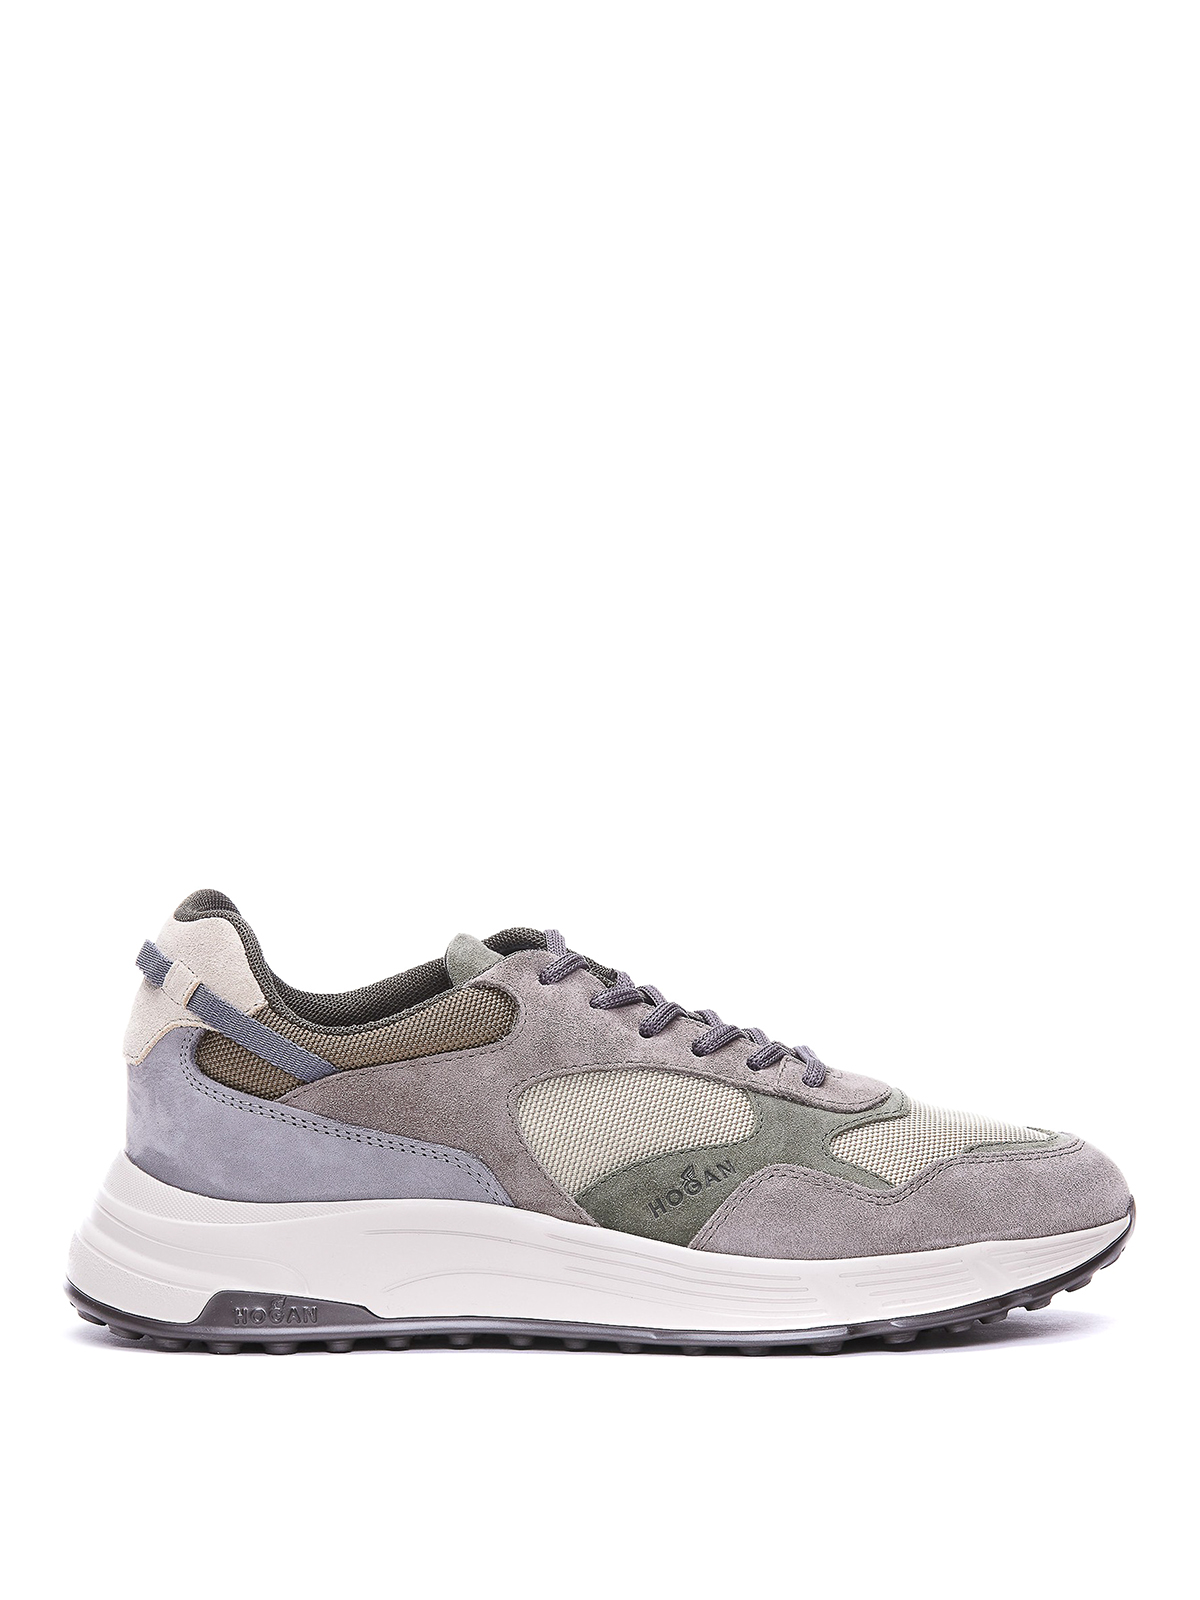 Hogan Leather And Fabric Sneakers In Grey